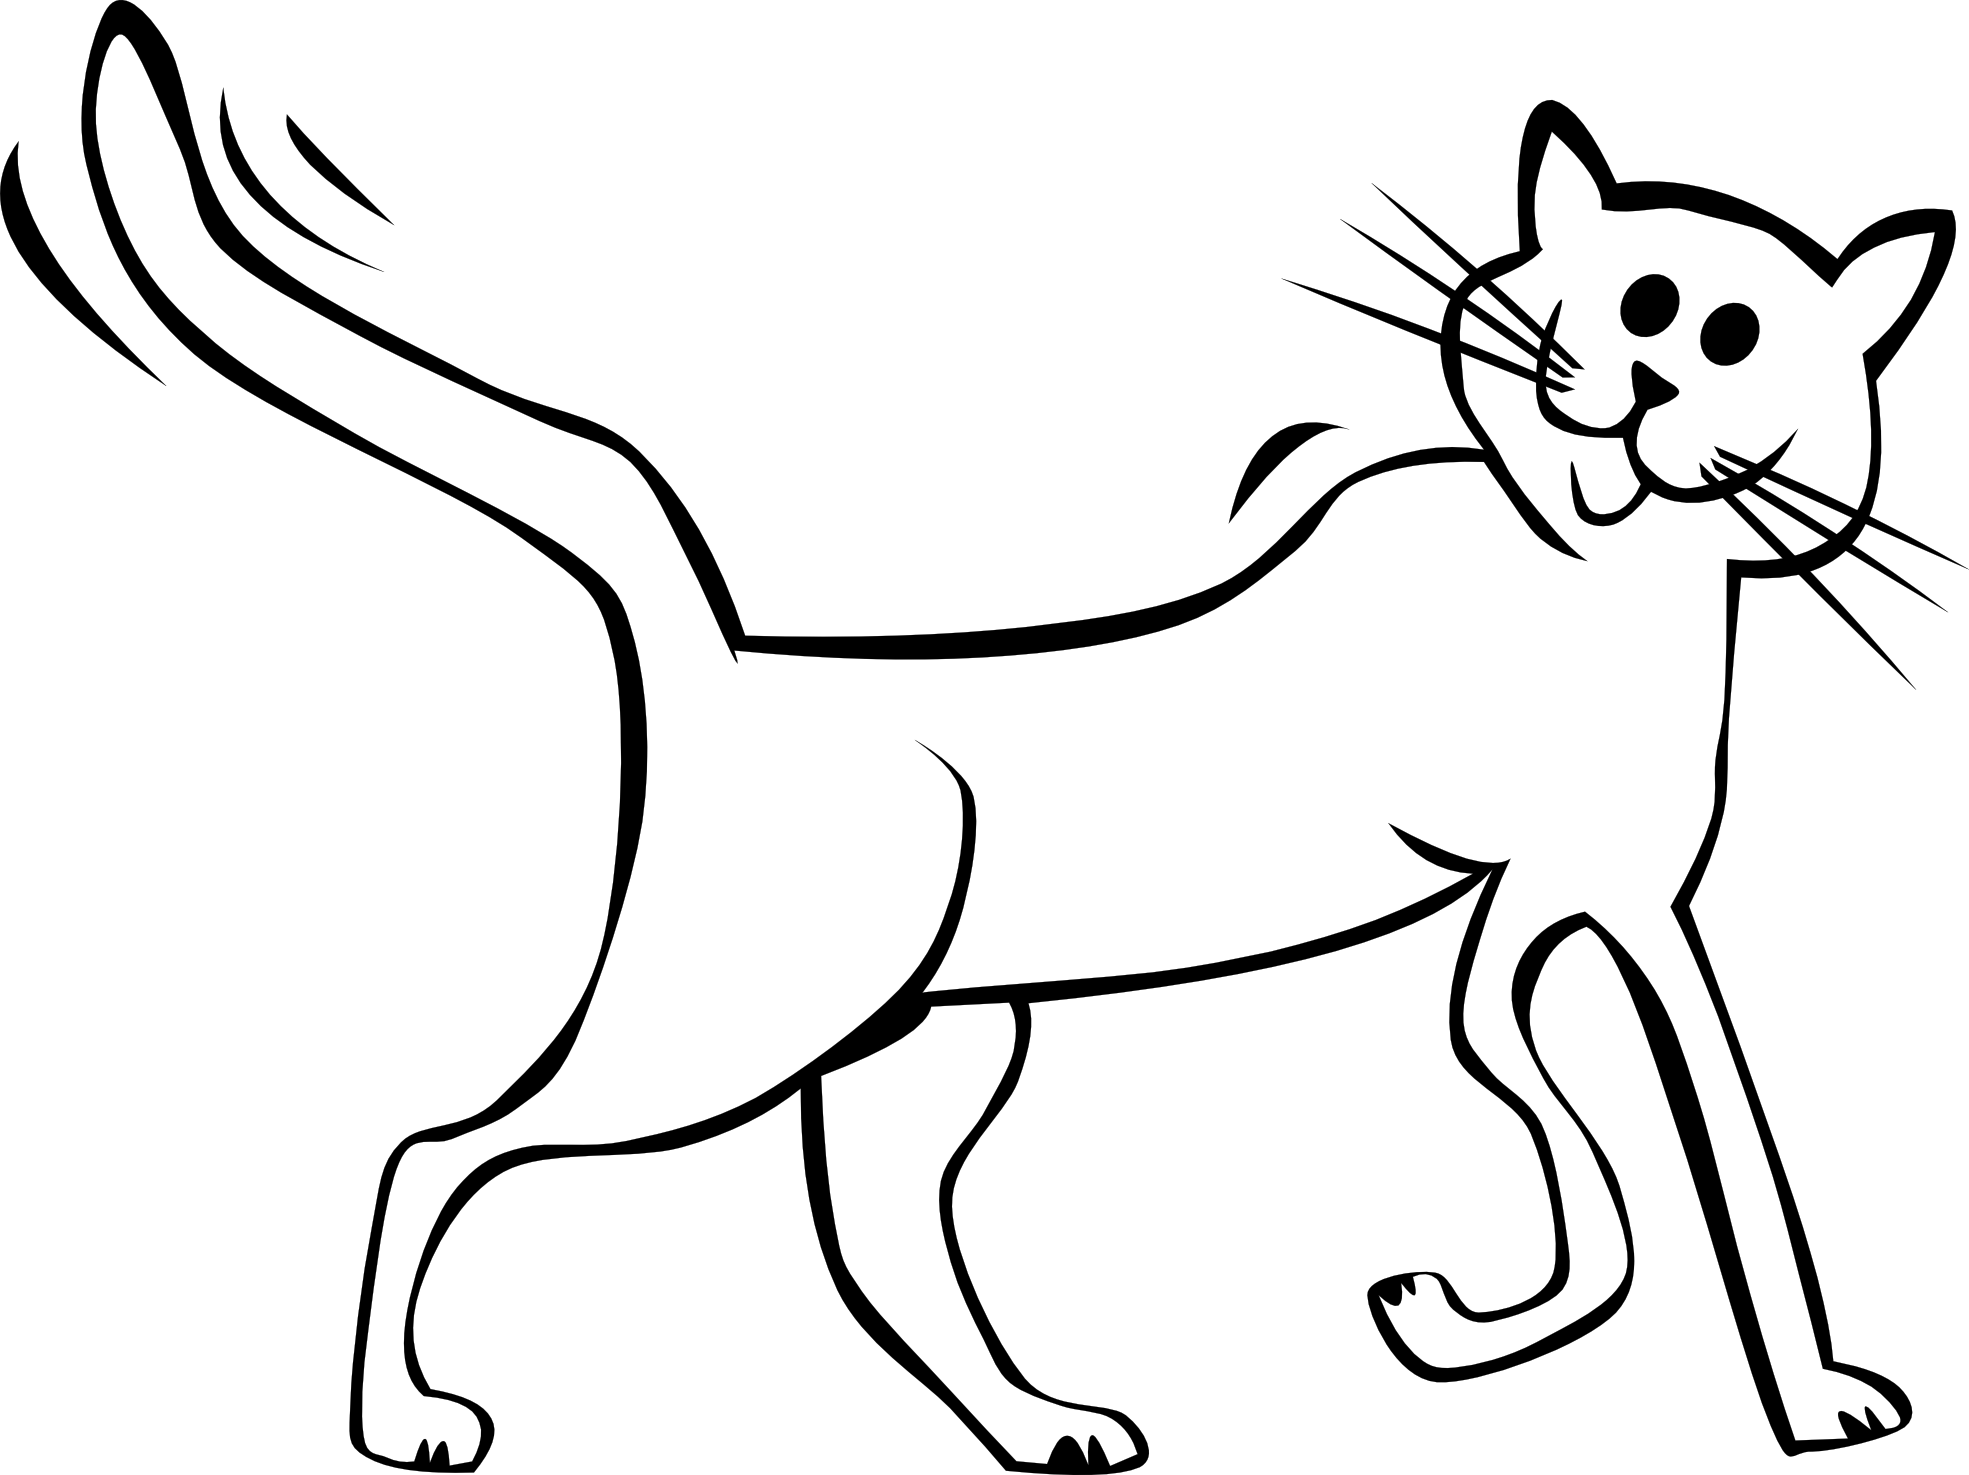 Cartoon Cat Black And White - Clipart library